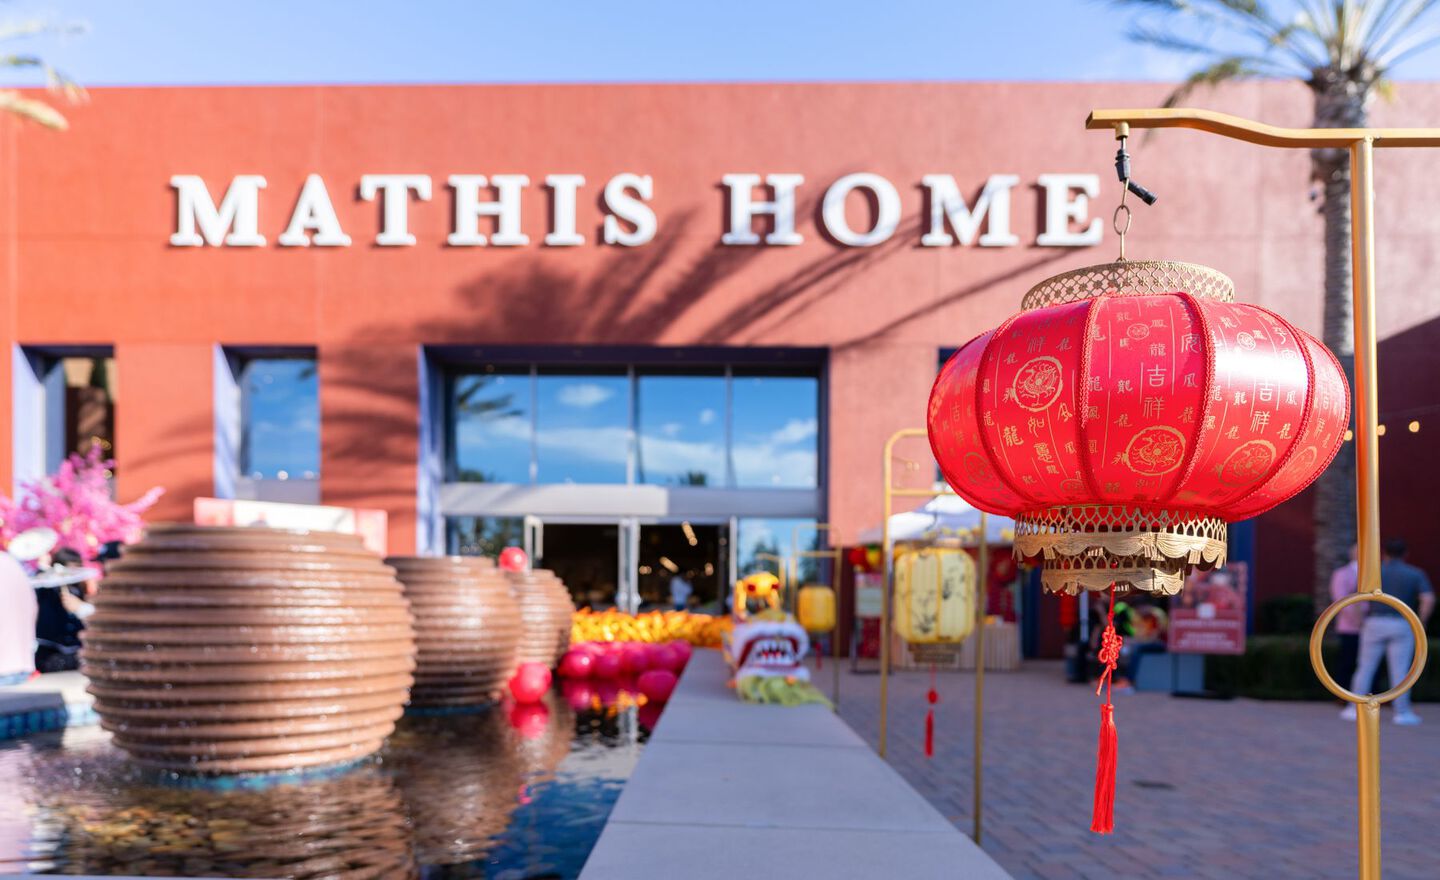 The Mathis Home storefront in Irvine with a red and gold lantern and decorations in front